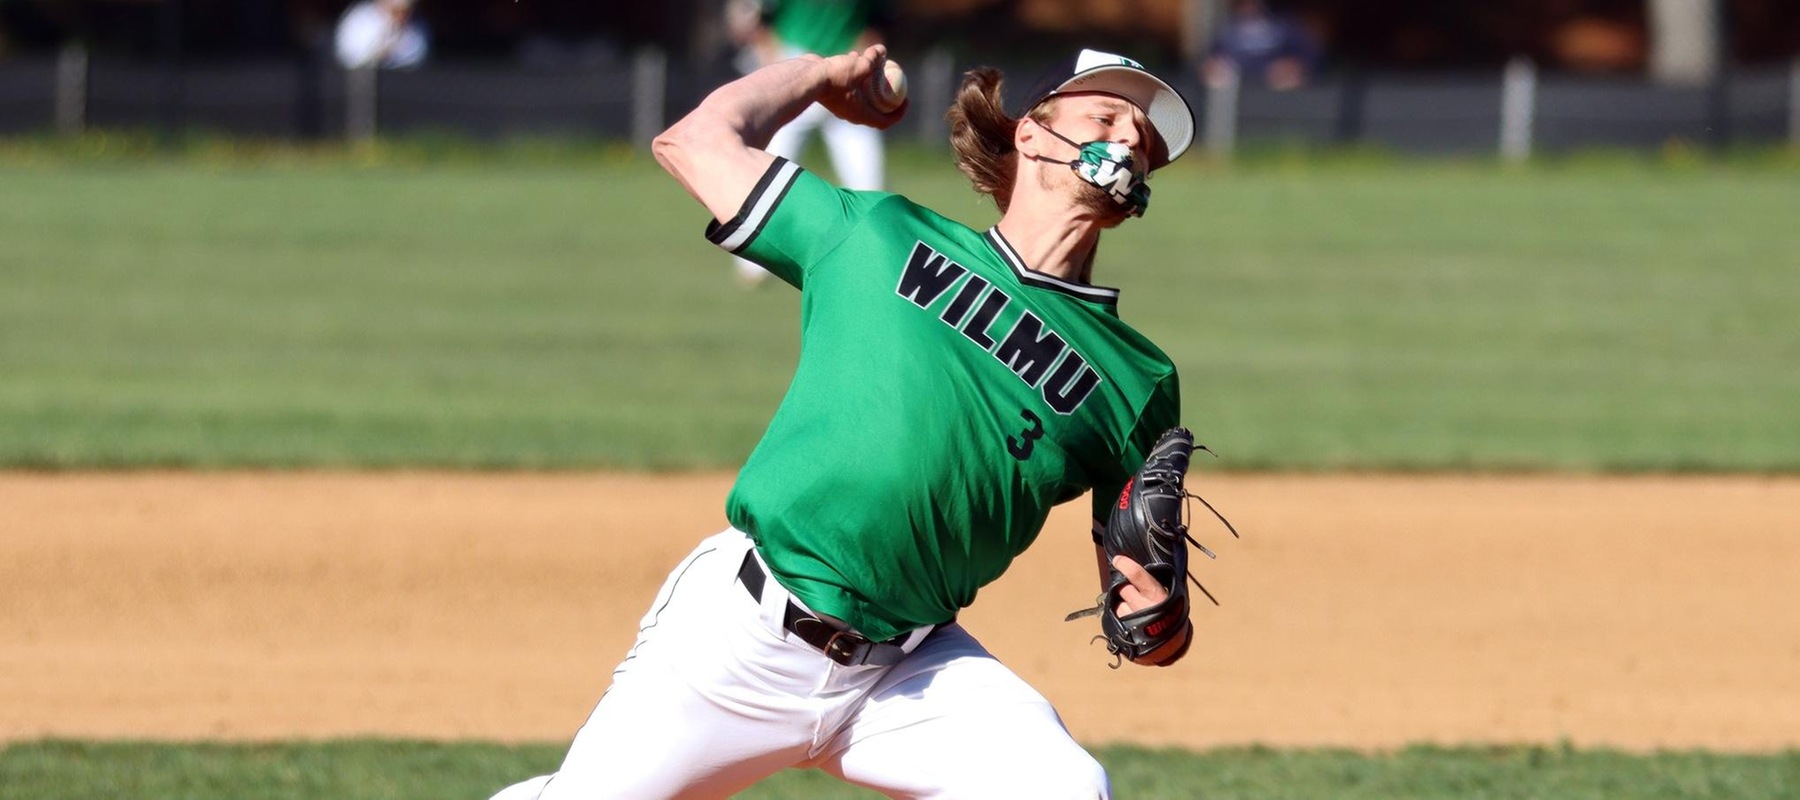 File photo of Ryan Sandberg who threw a complete game in game one at Caldwell. Copyright 2021; Wilmington University. All rights reserved. Photo by Dan Lauletta. April 13, 2021 vs. Nyack at Wilson Field.